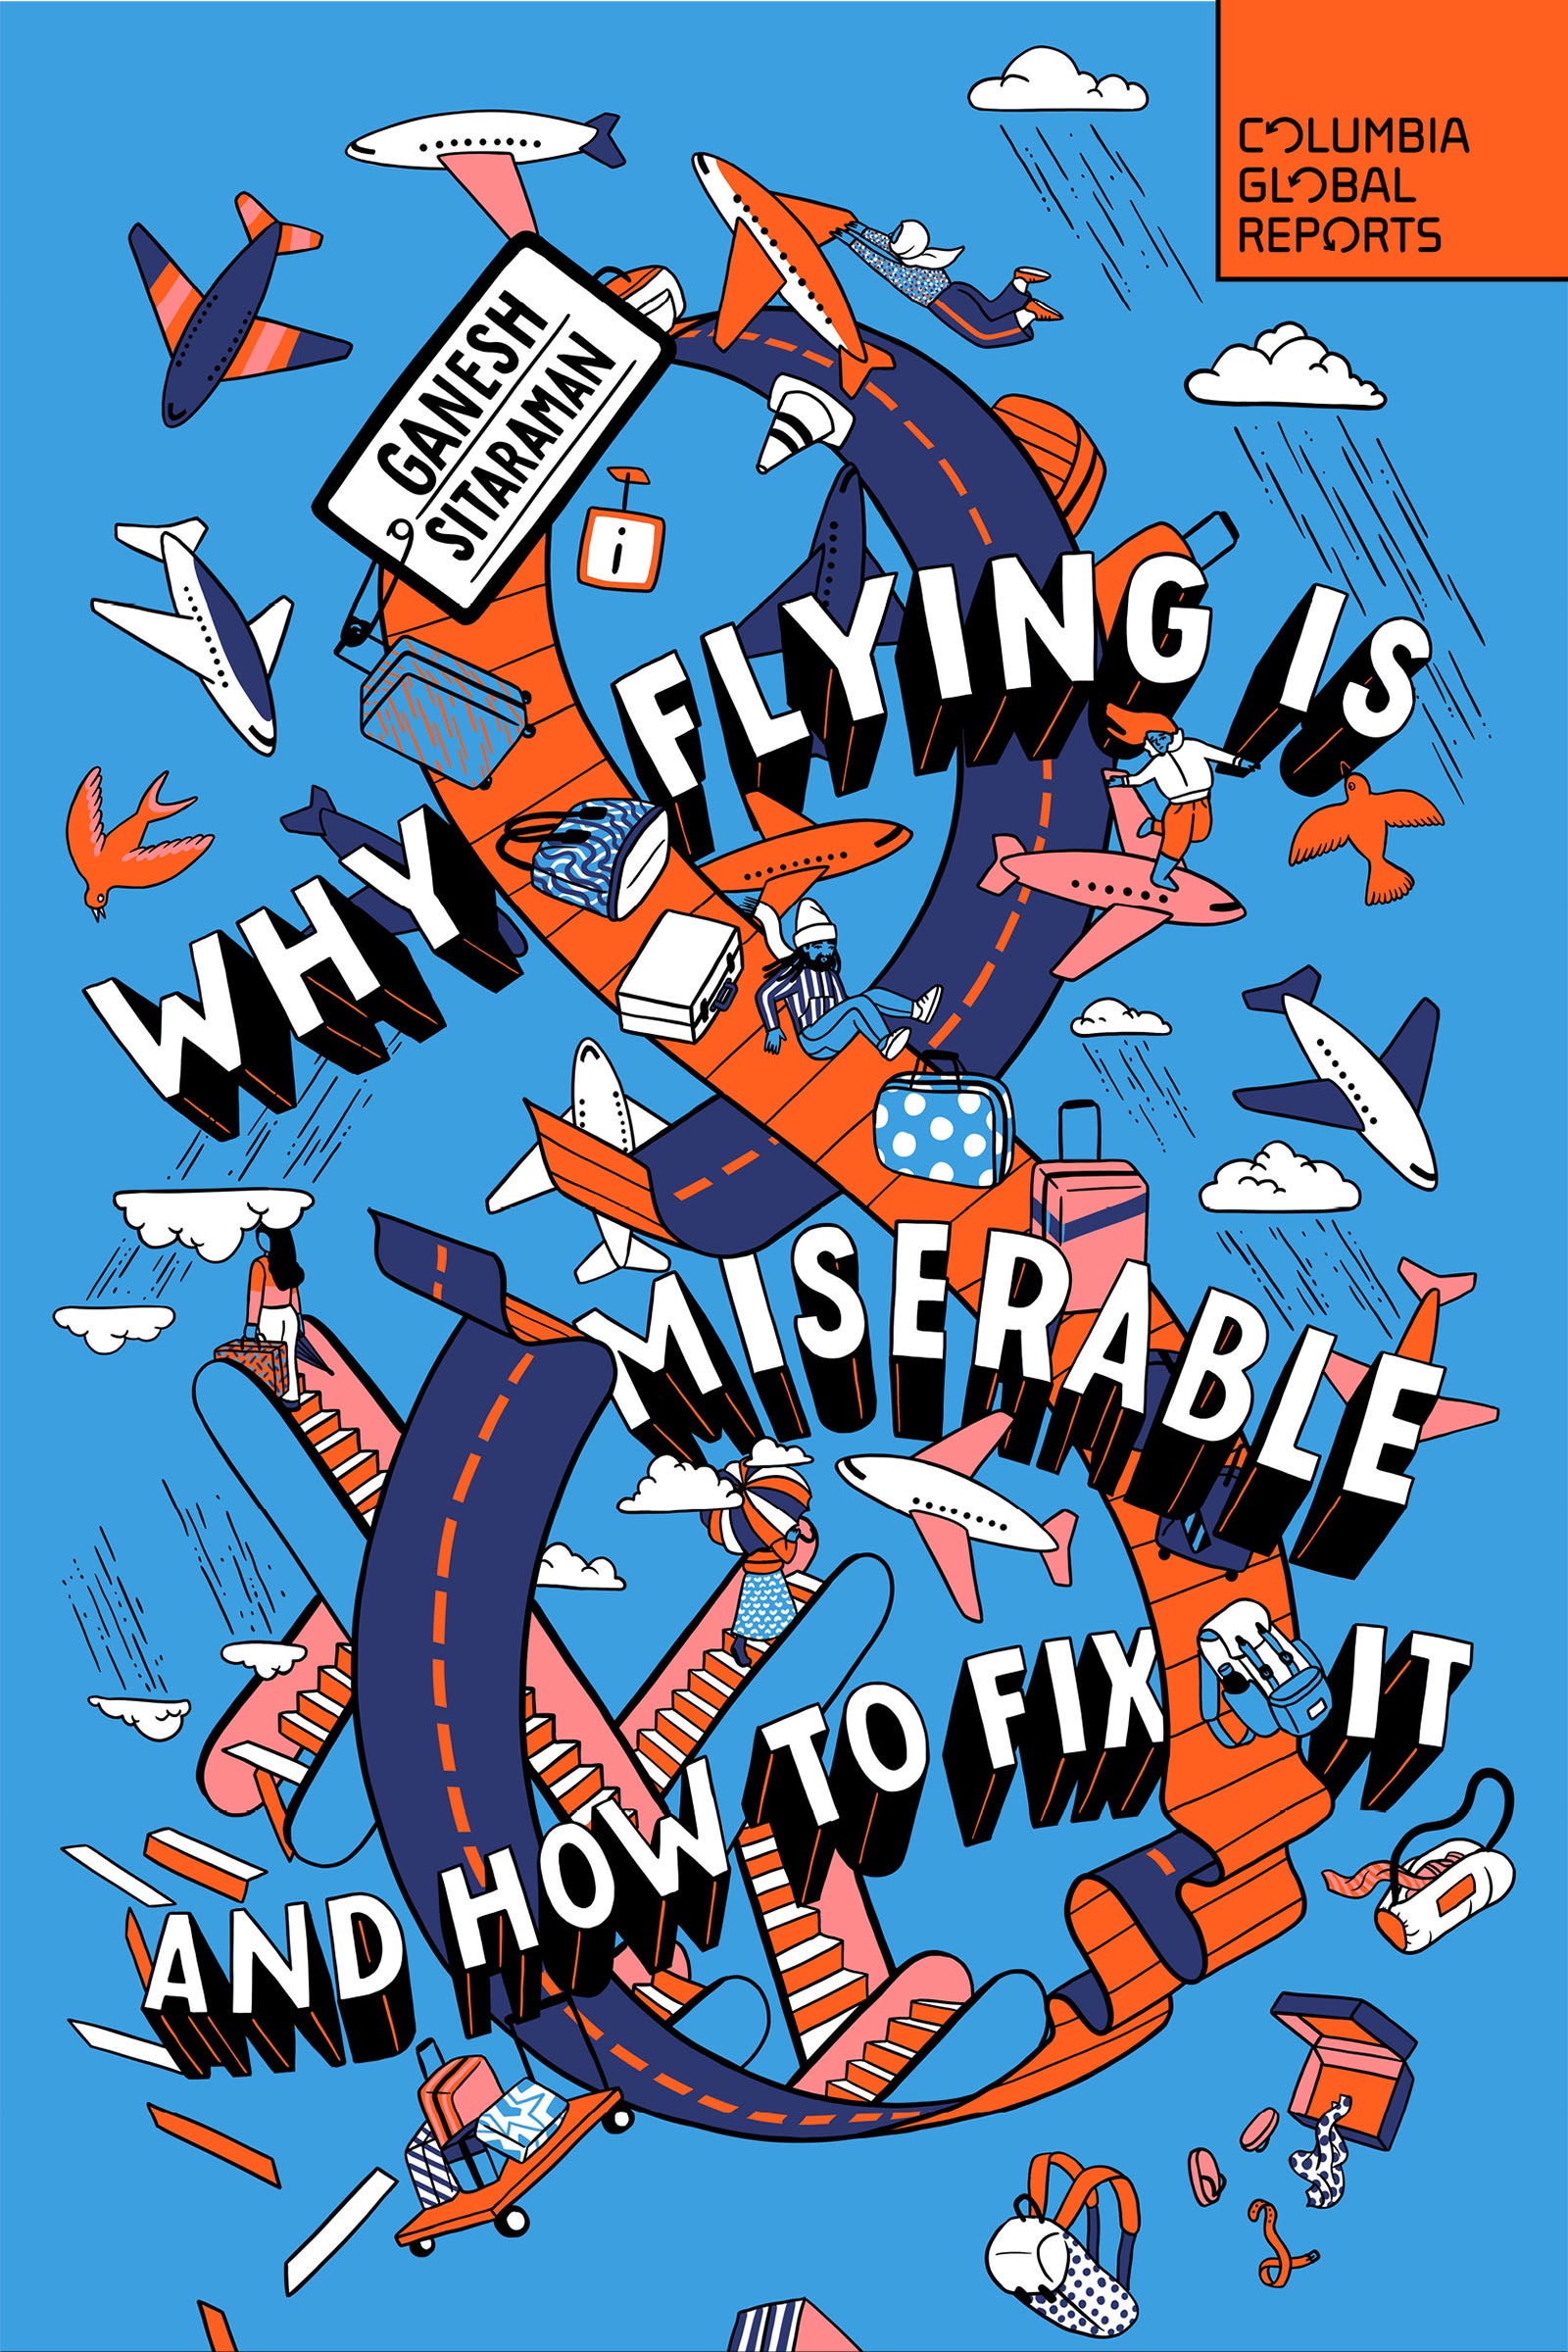 Why Flying is Miserable book cover.